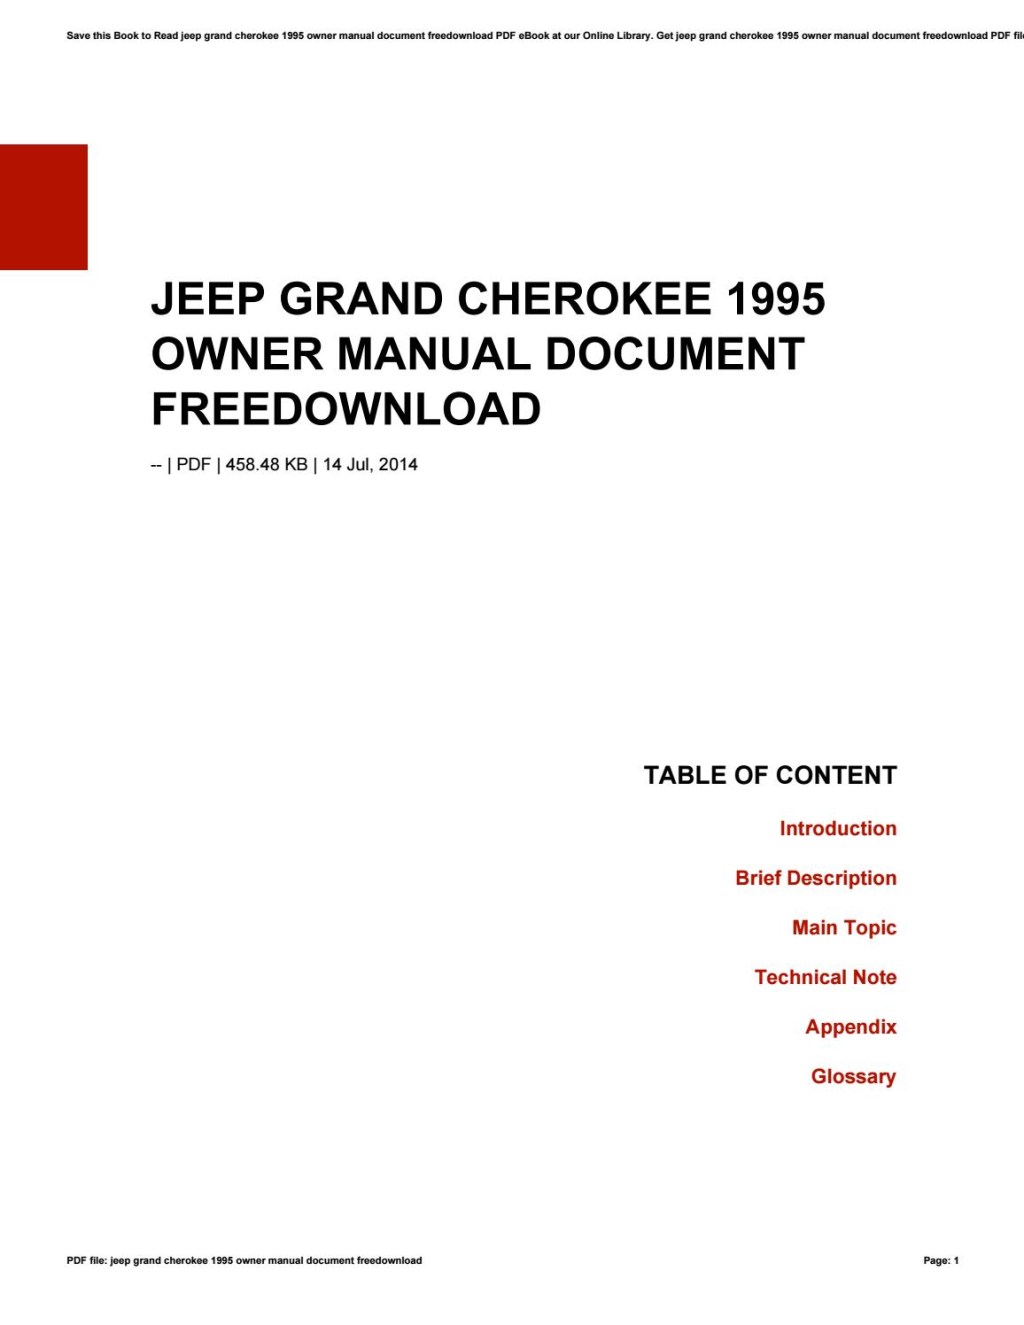 Picture of: Jeep grand cherokee  owner manual document freedownload by